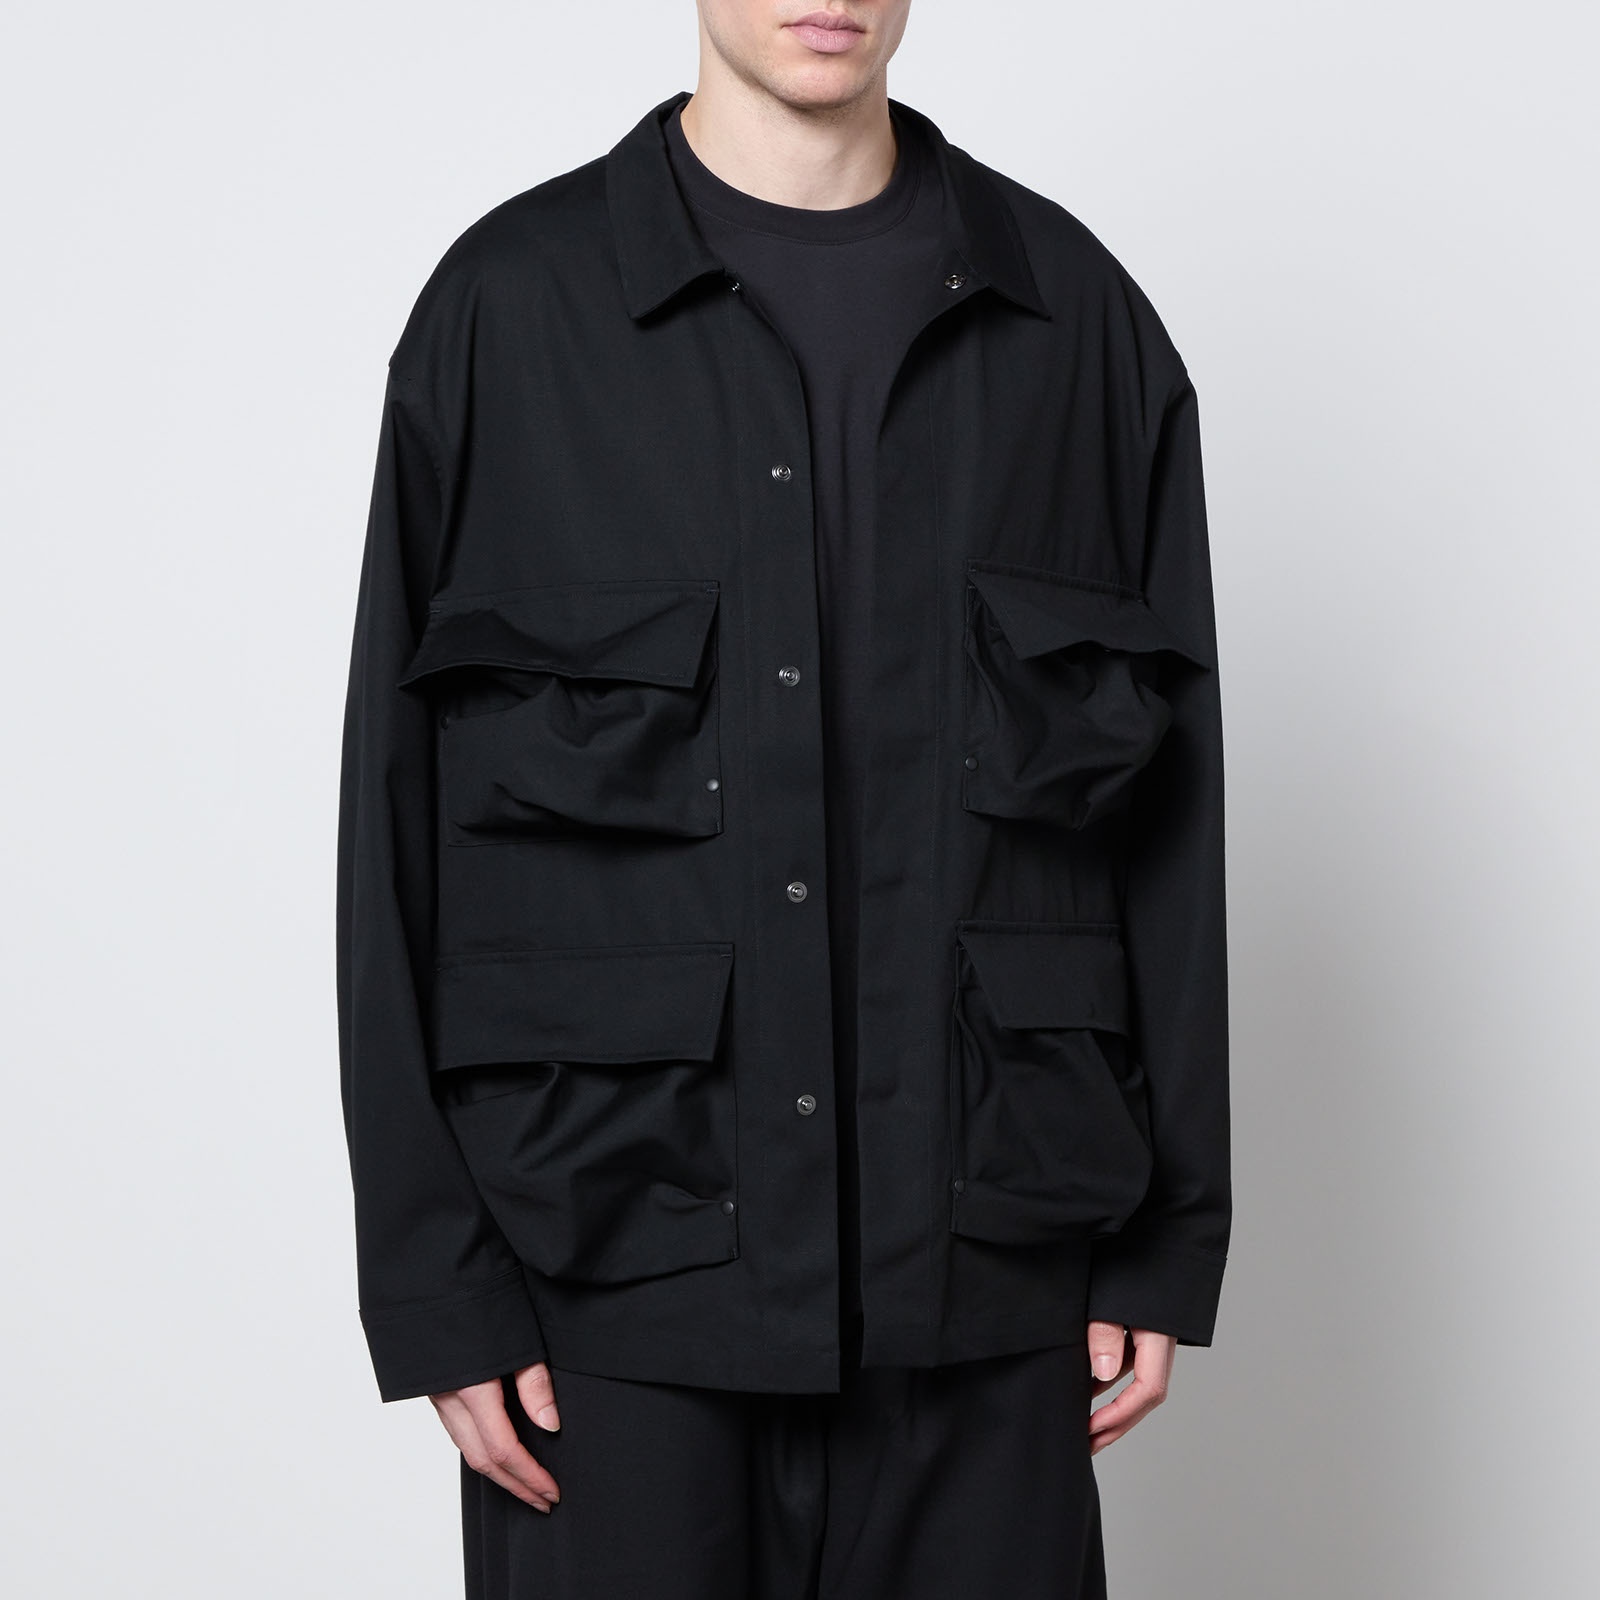 Y-3 Four Flap Pocket Woven Overshirt - 1